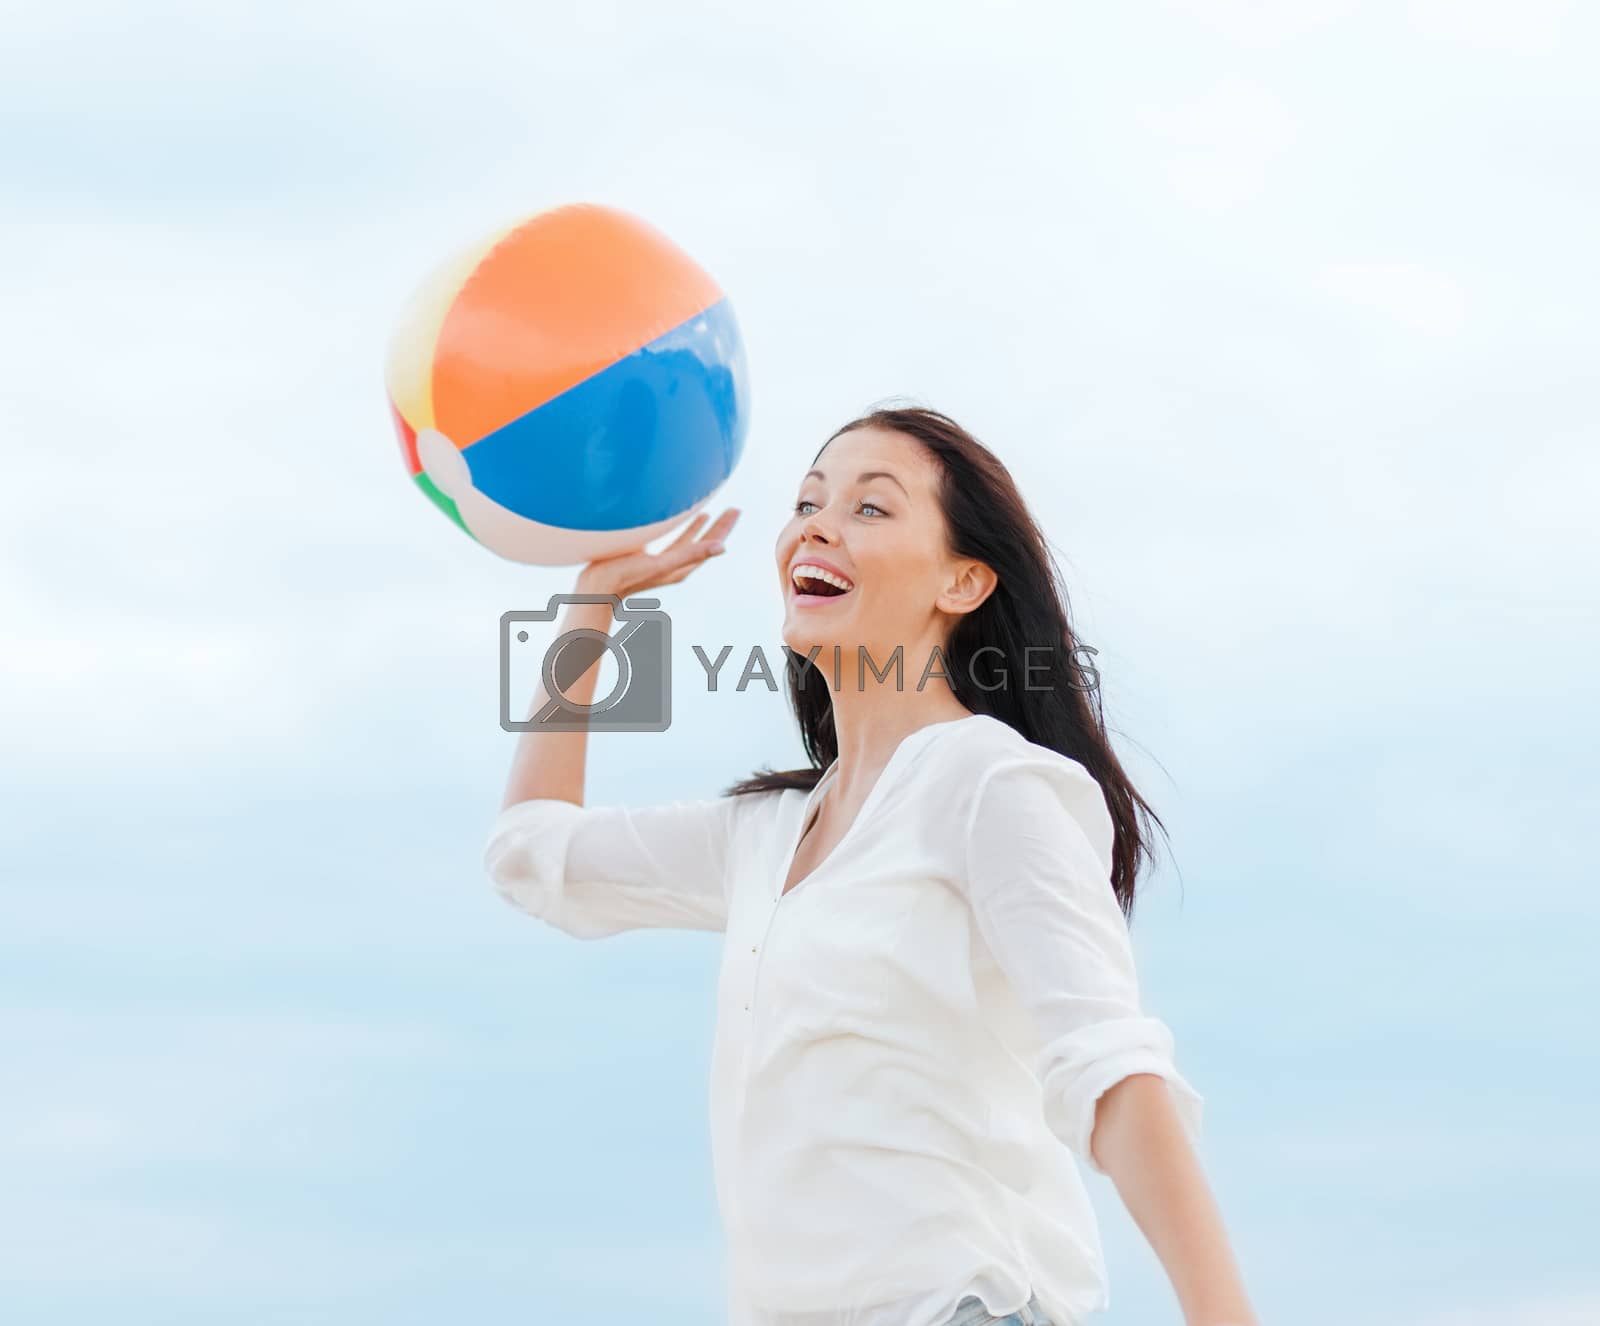 Royalty free image of girl with ball on the beach by dolgachov